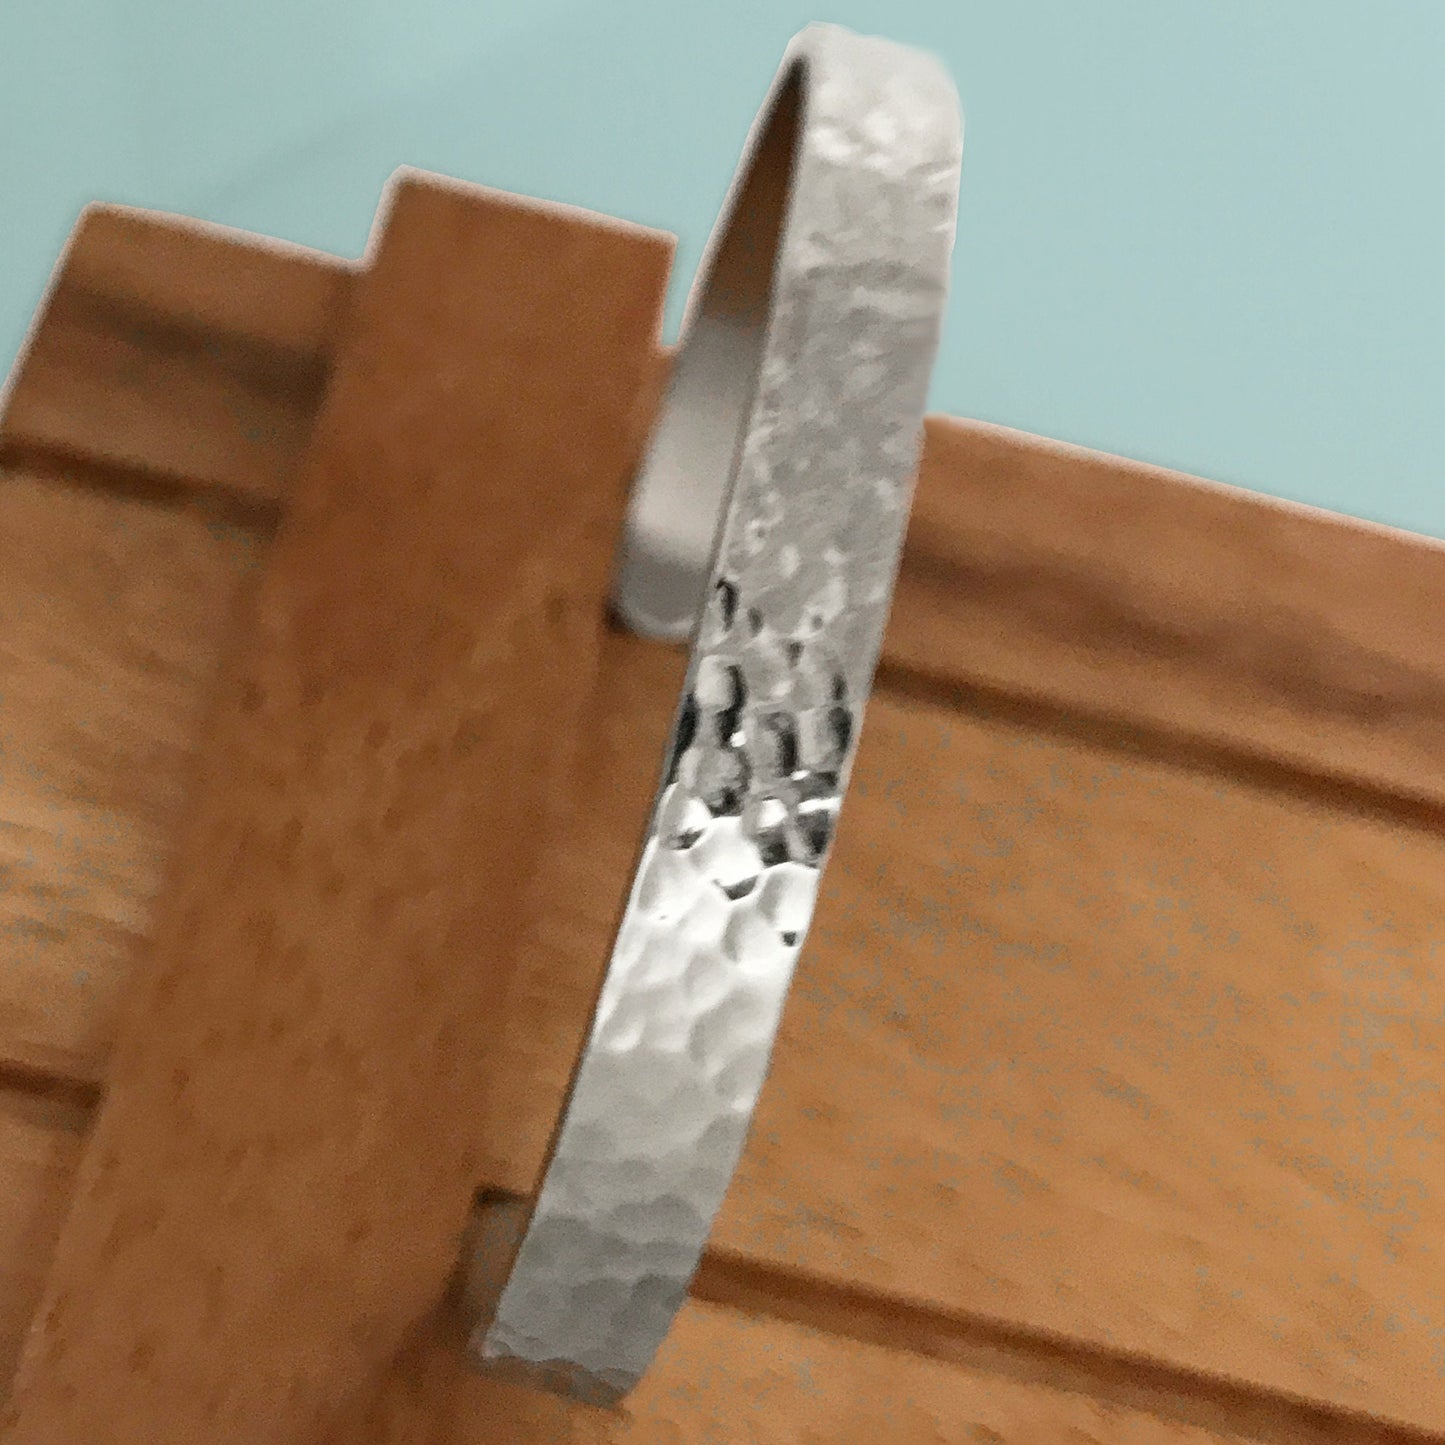 Stainless Steel Hammered Cuff Bracelet, Unisex Design, Mens Thin Bangle, Polished Silver Finish, Gift for Women, graduation gift